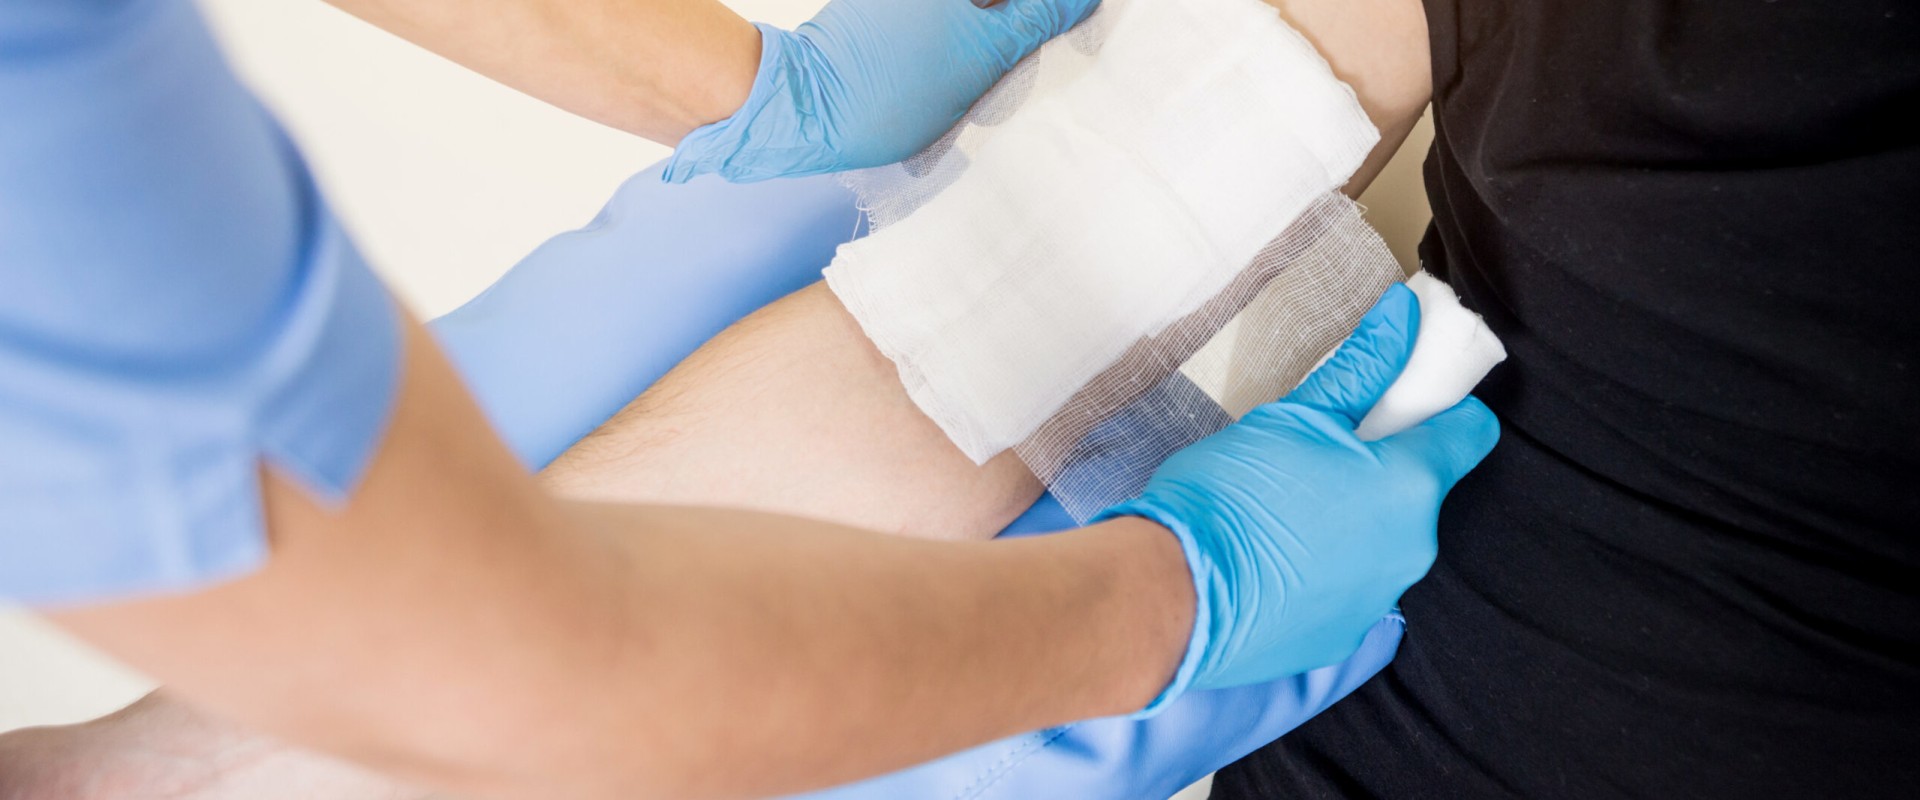 The Importance of Proper Wound Care Documentation